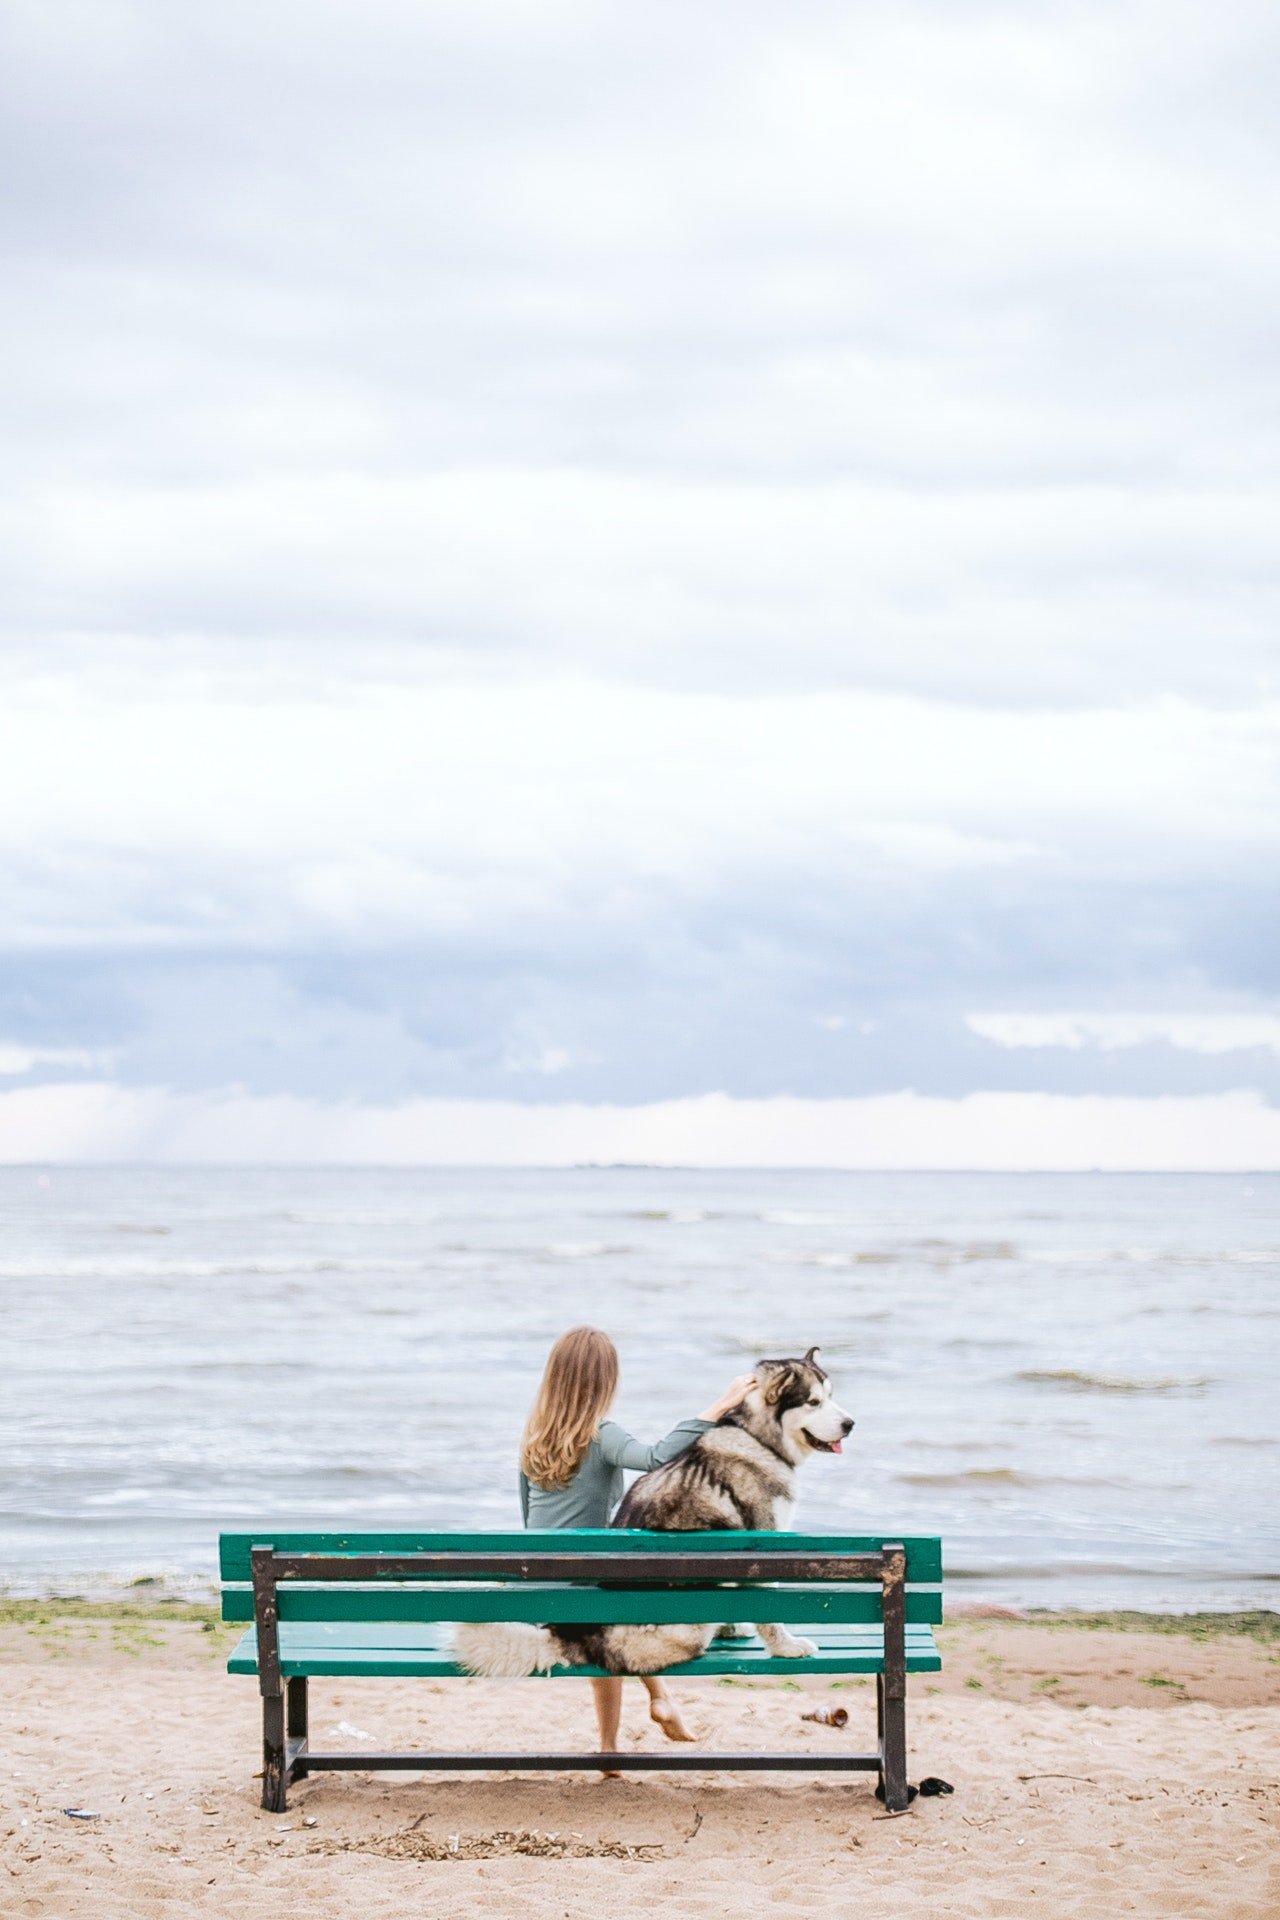 Woman sitting on a bench with her dog| Photo: La Miko from Pexels